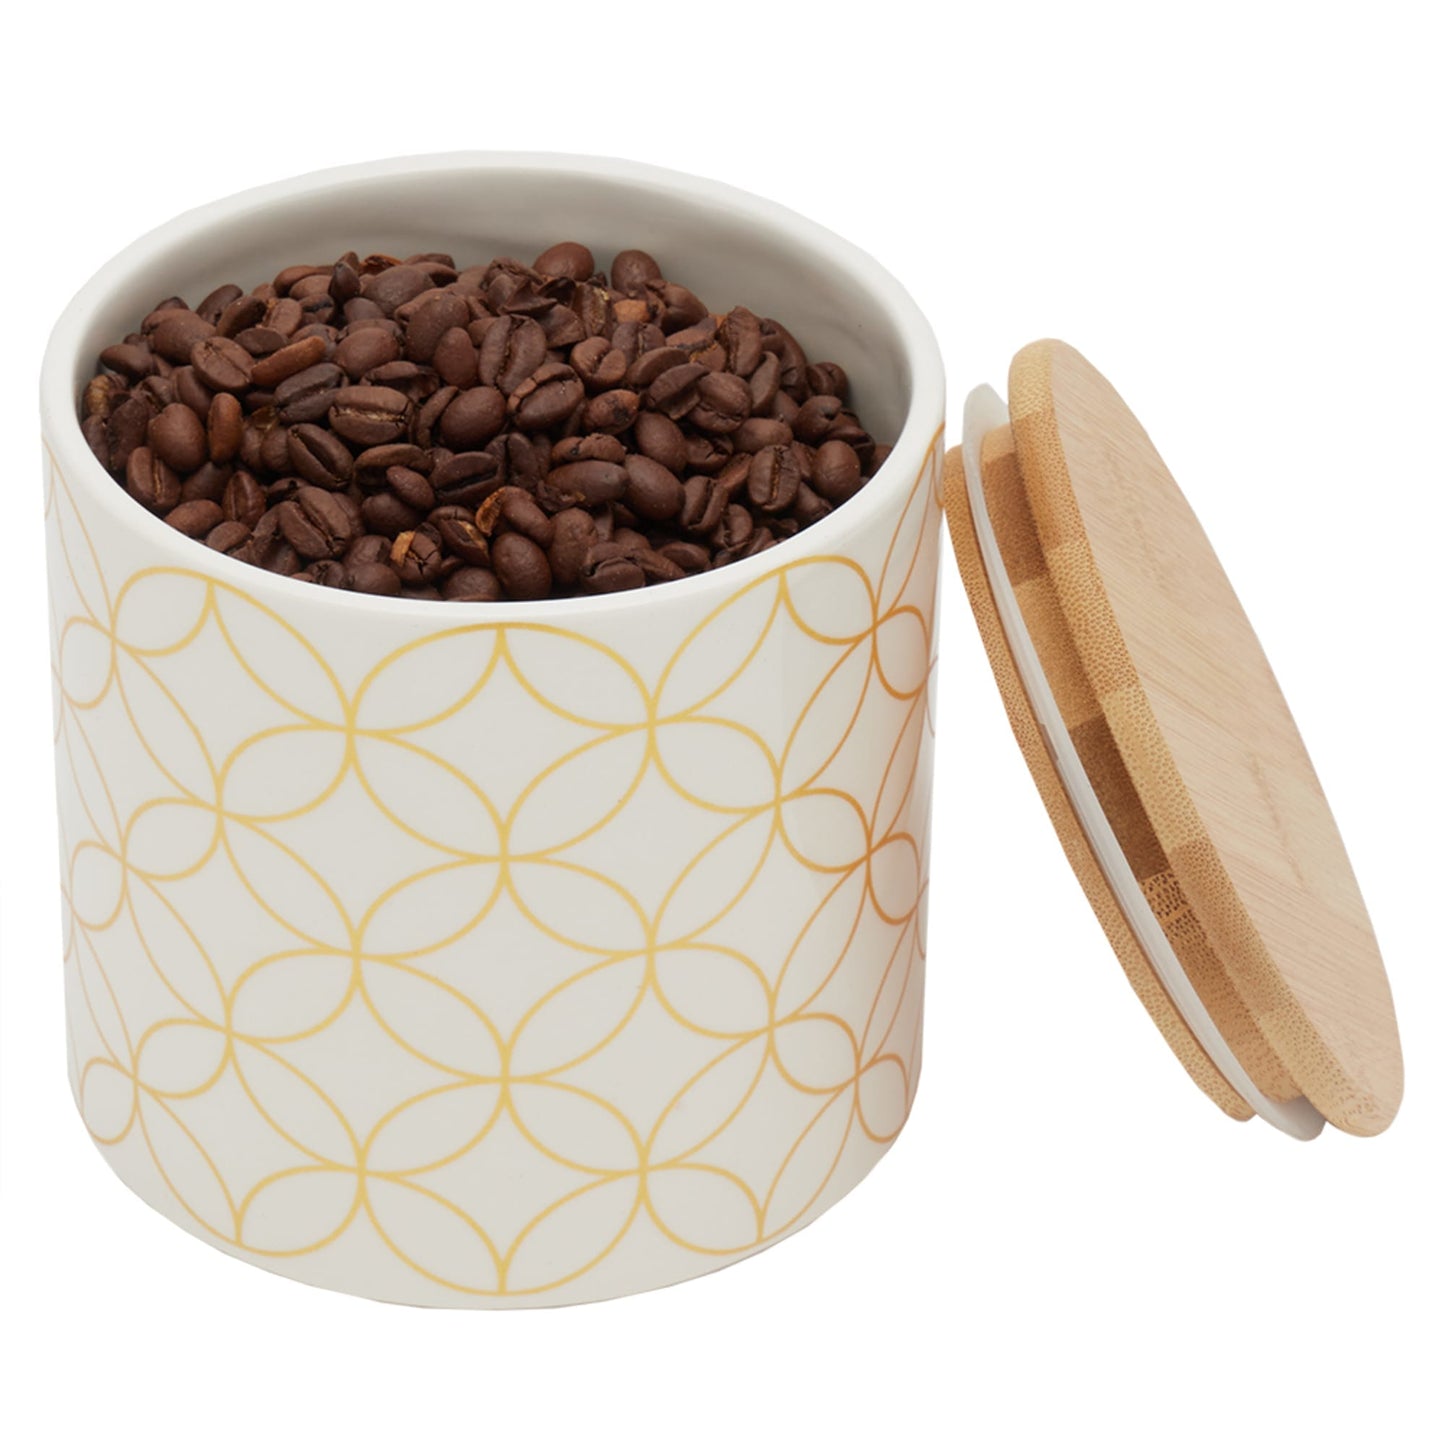 Vescia Small Ceramic Canister with Bamboo Top